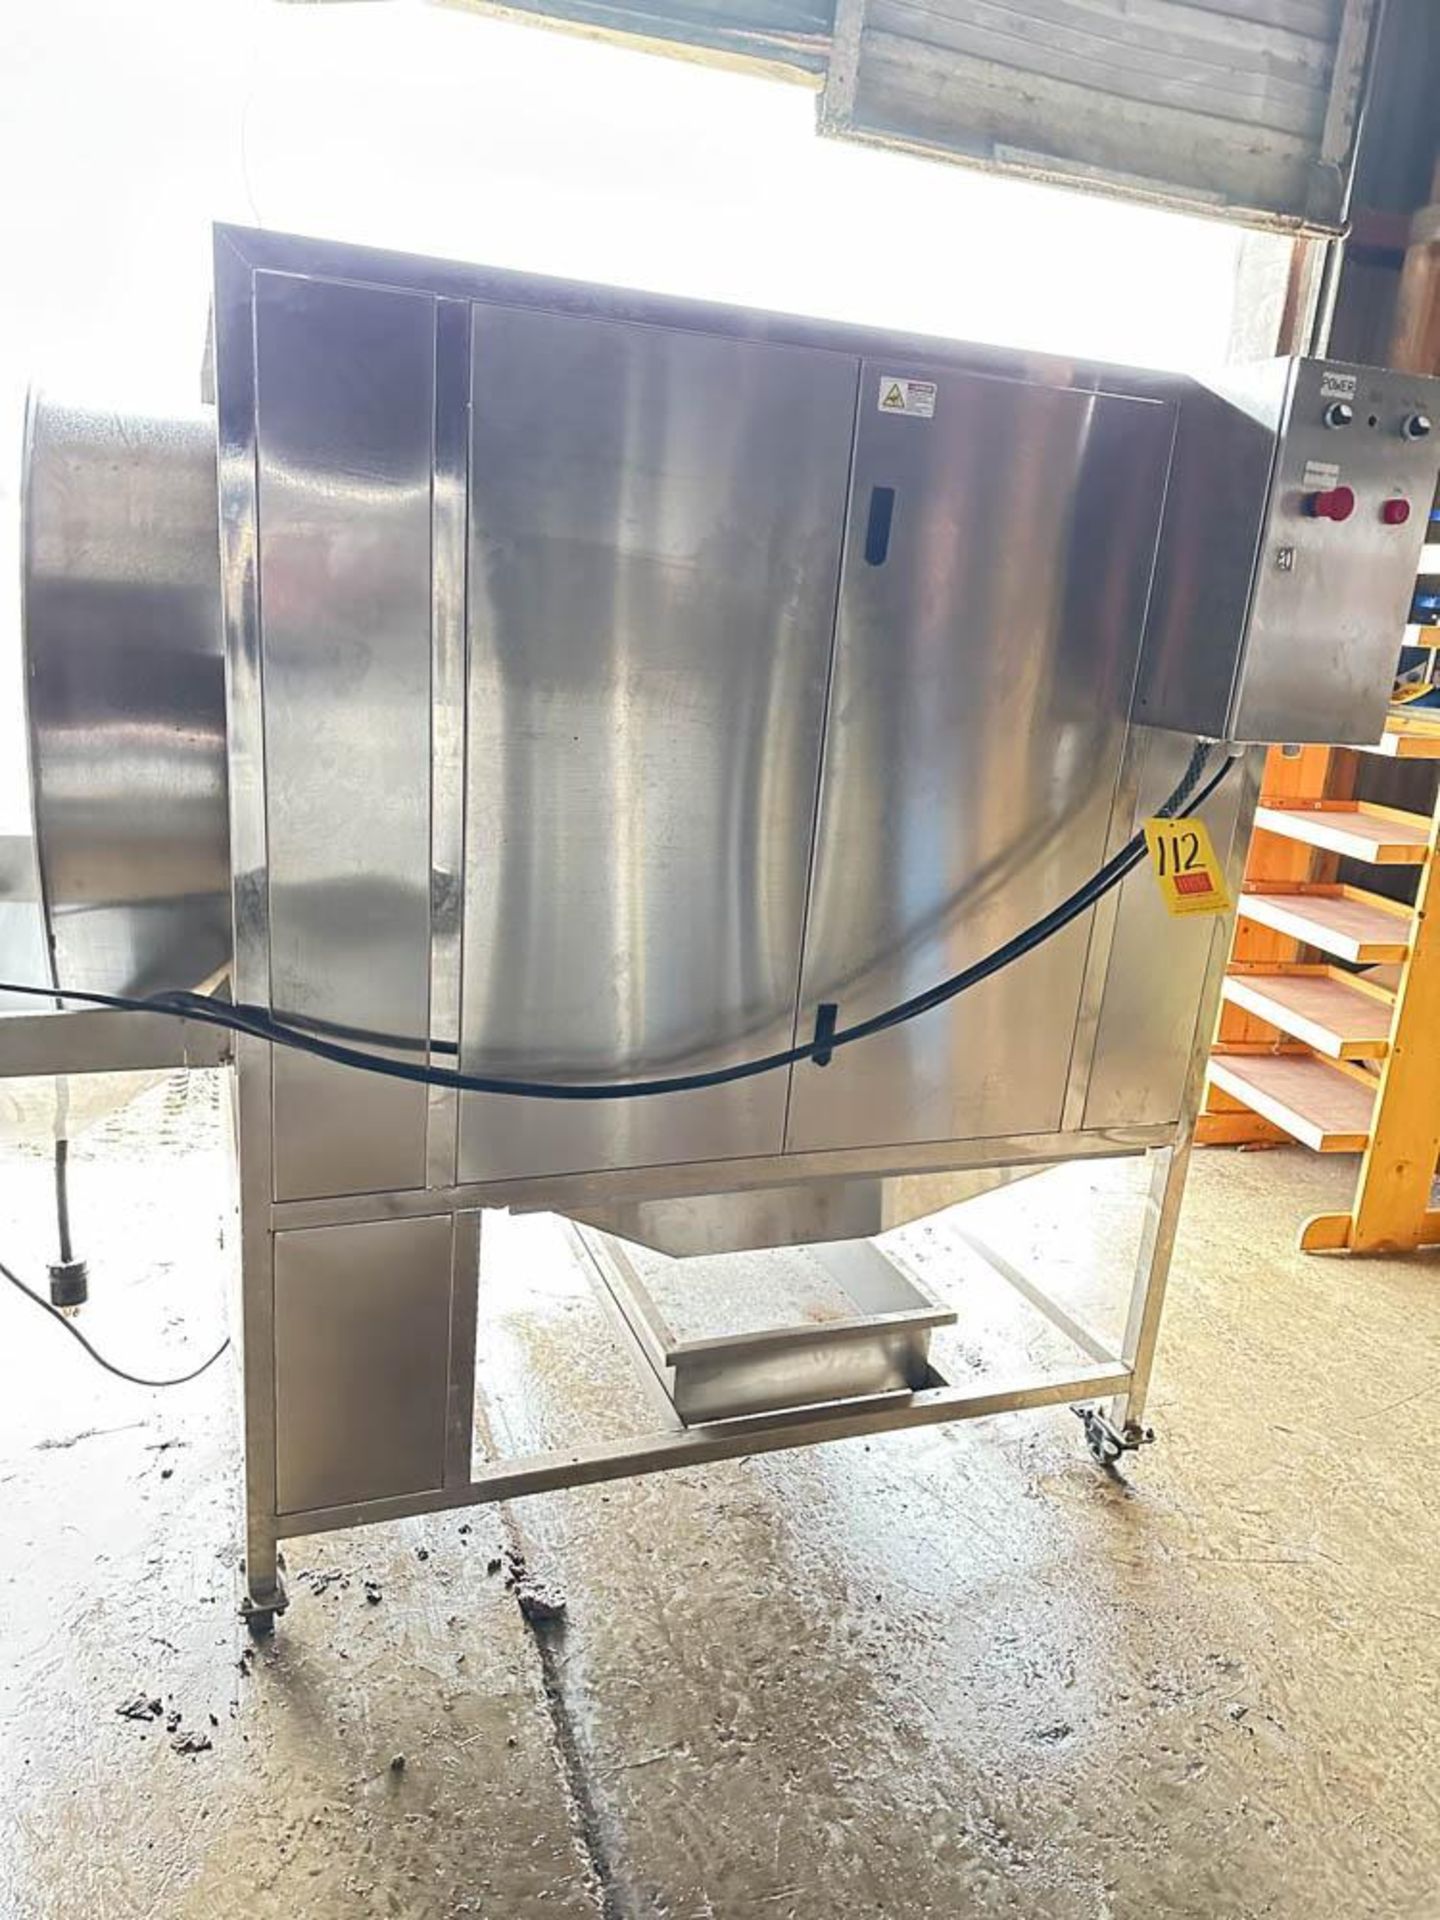 Sonic 350 In-Motion S/S Checkweigher (Location: St. Ignace, MI) - Rigging Fee: $150 - Image 2 of 2